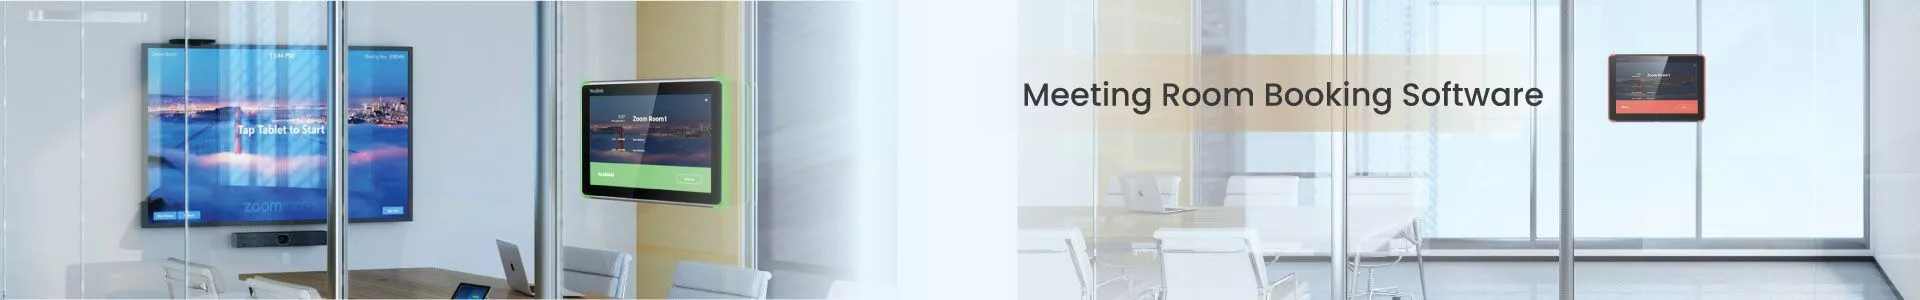 Meeting Room Booking Software